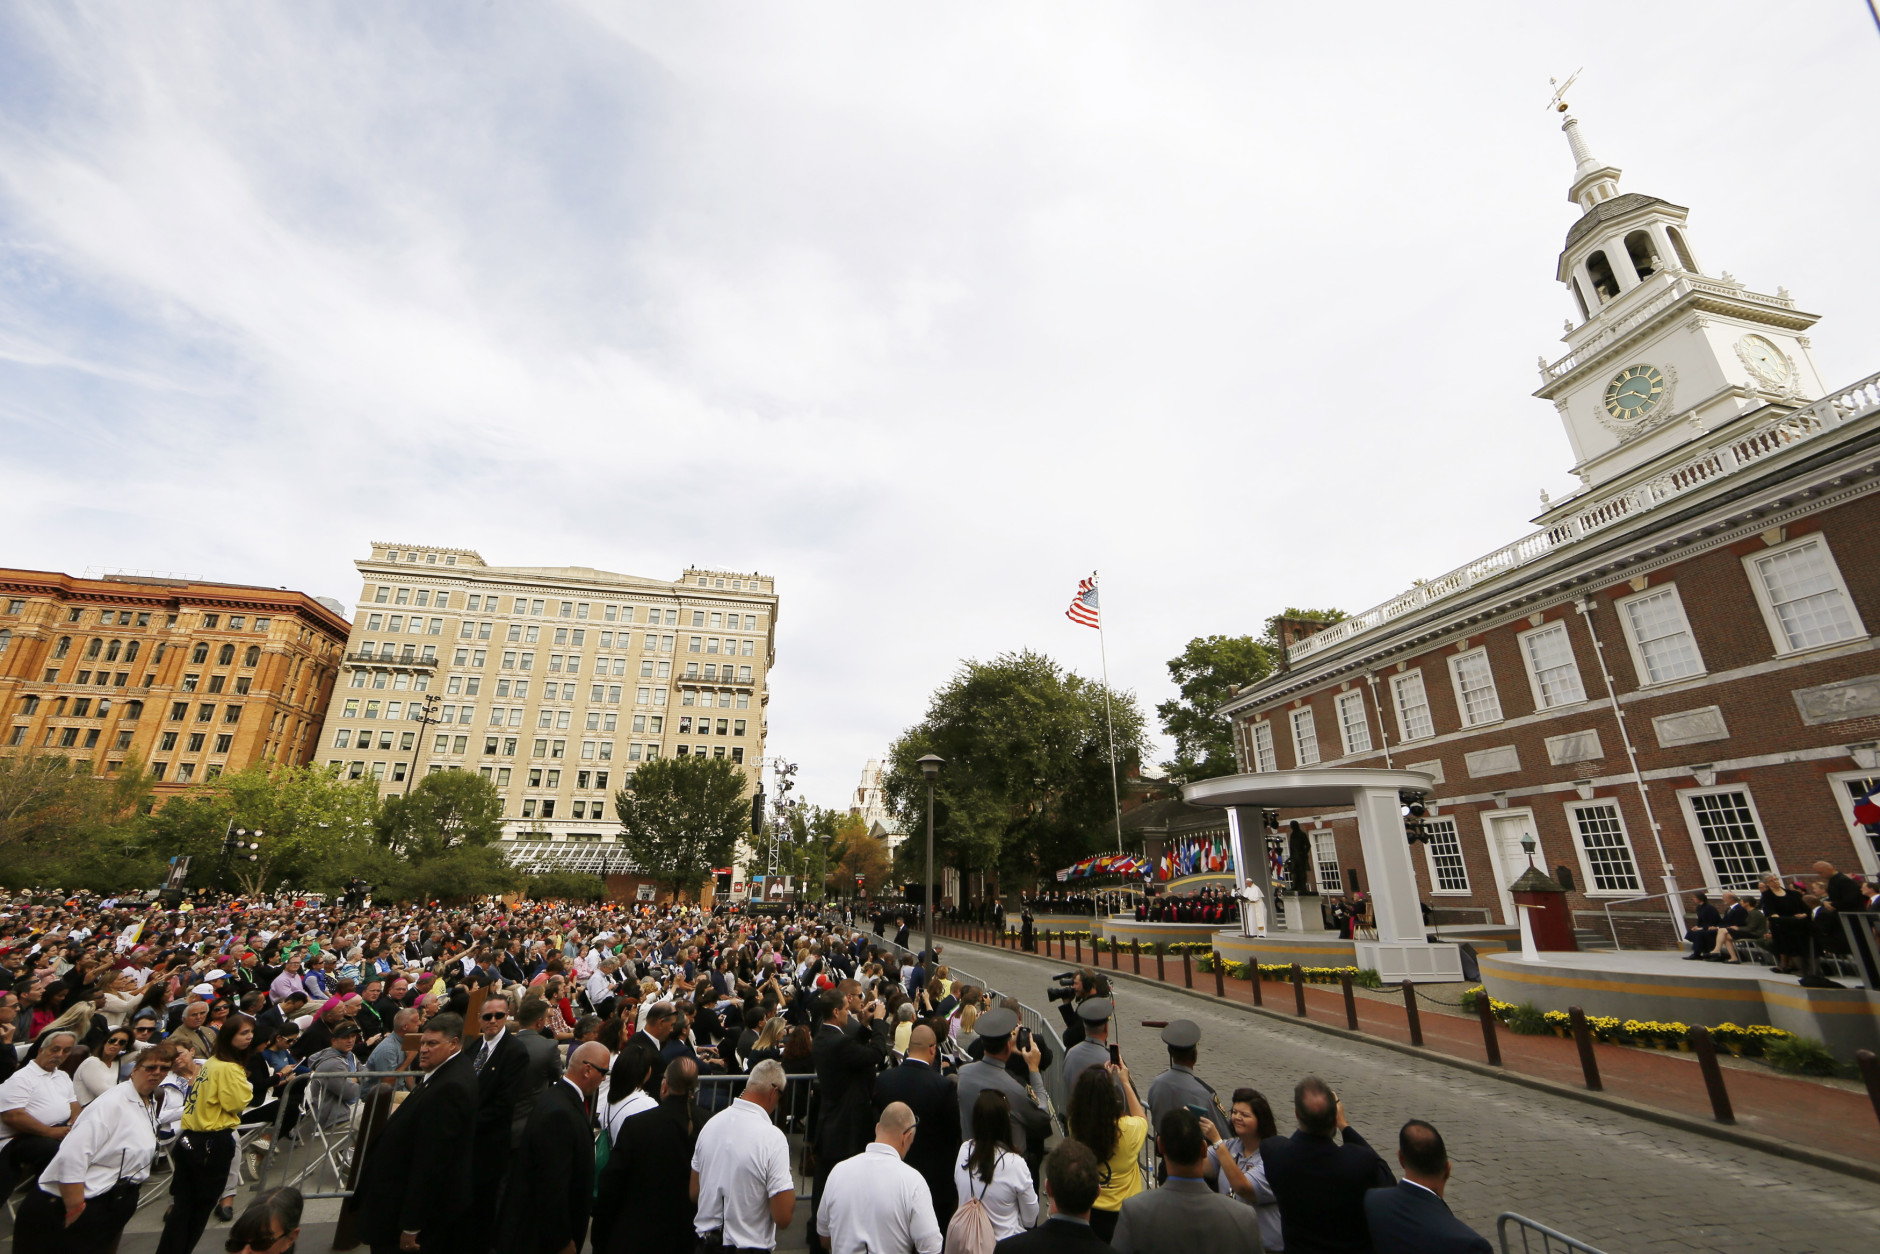 PHILADELPHIA, PA - SEPTEMBER 26: Pope Francis speaks at Independence Mall to watch Pope Francis speak in Philadelphia onSeptember 26, 2015 in Philadelphia., Pennsylvania. After visiting Washington and New York City, Pope Francis concludes his tour of the U.S. with events in Philadelphia on Saturday and Sunday. (Photo by Jim Bourg-Pool/Getty Images)